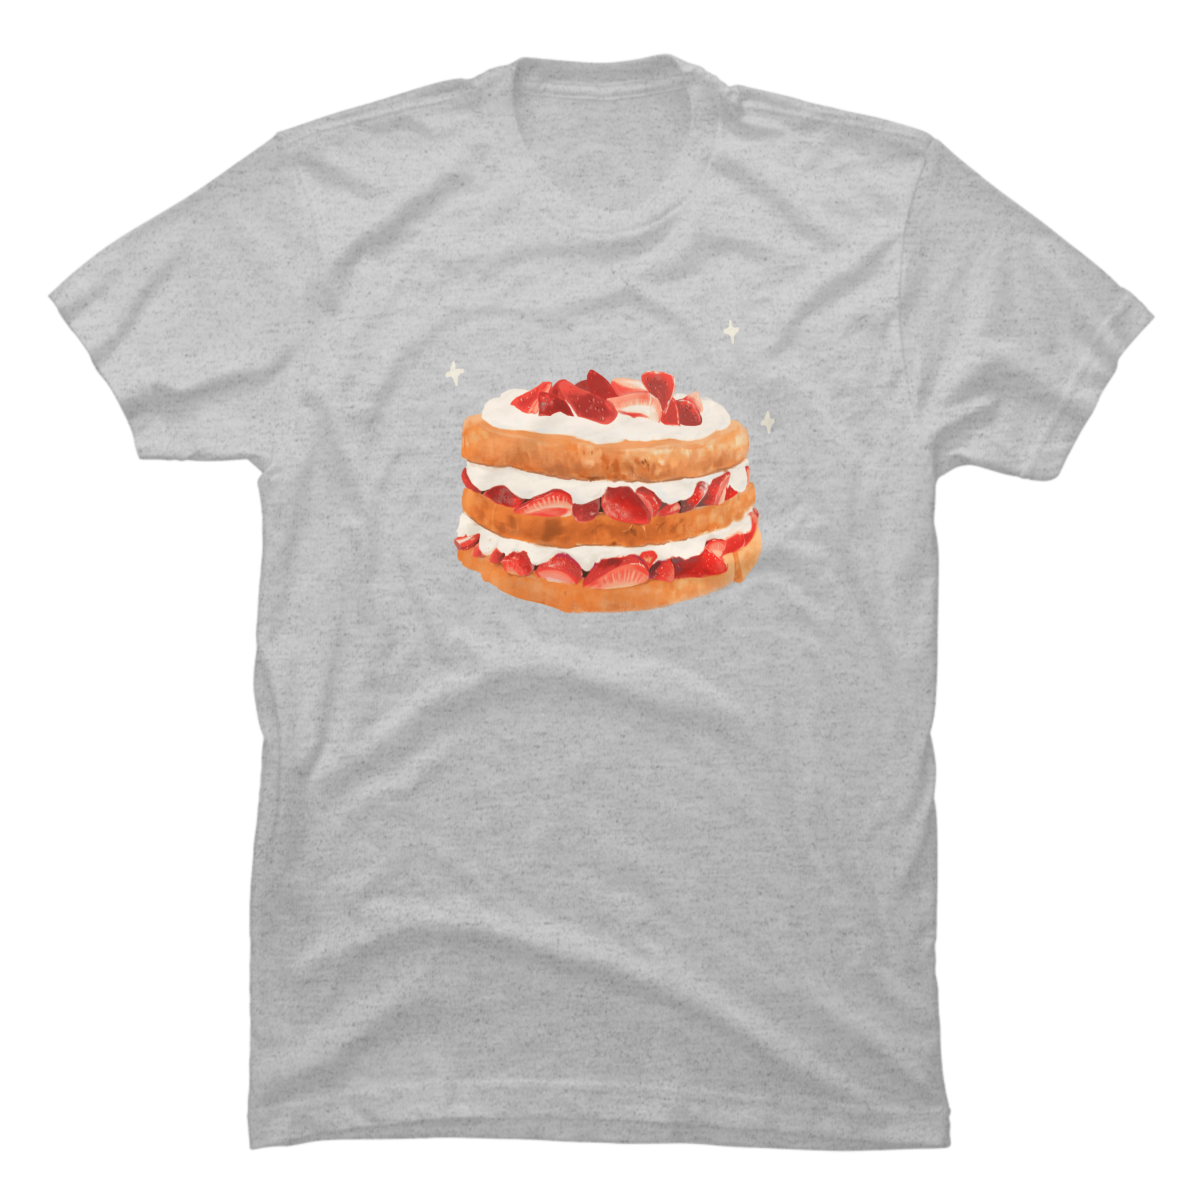 strawberry shortcake shirts for adults